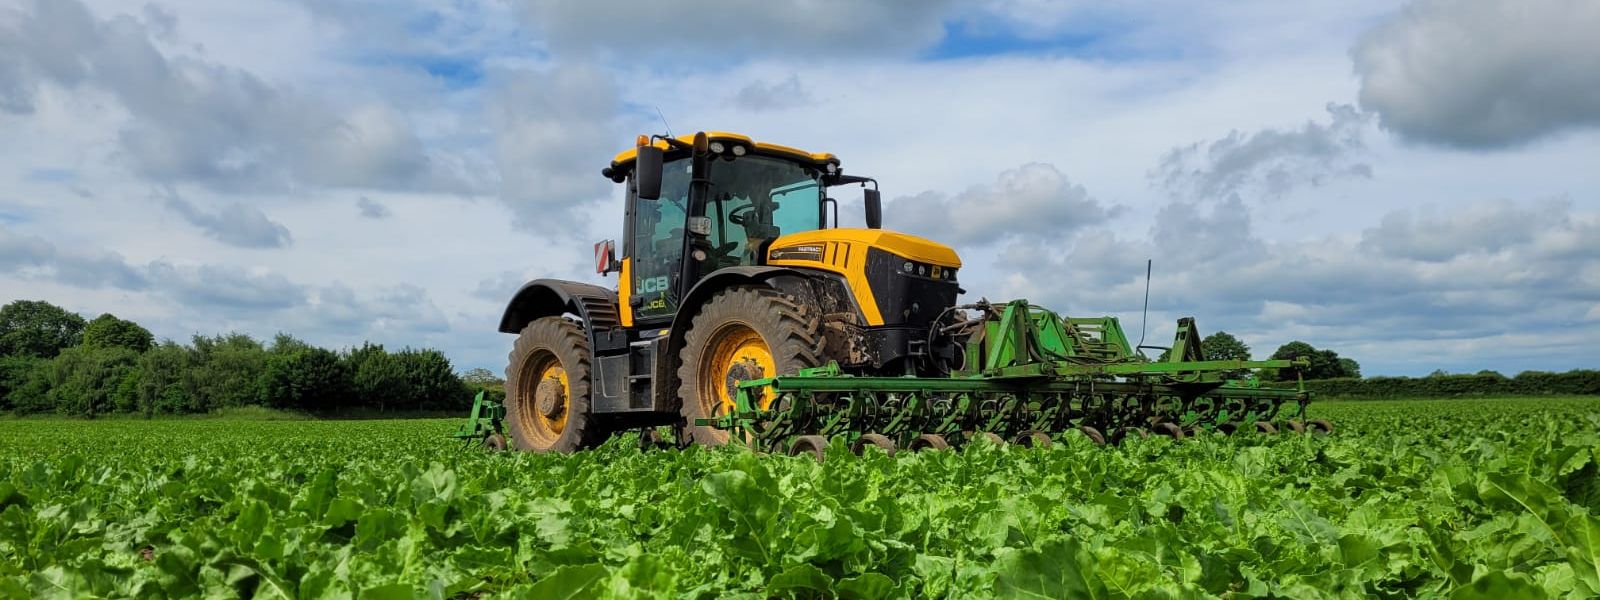 Yellow JCB tractor weed controlling for sugar beets